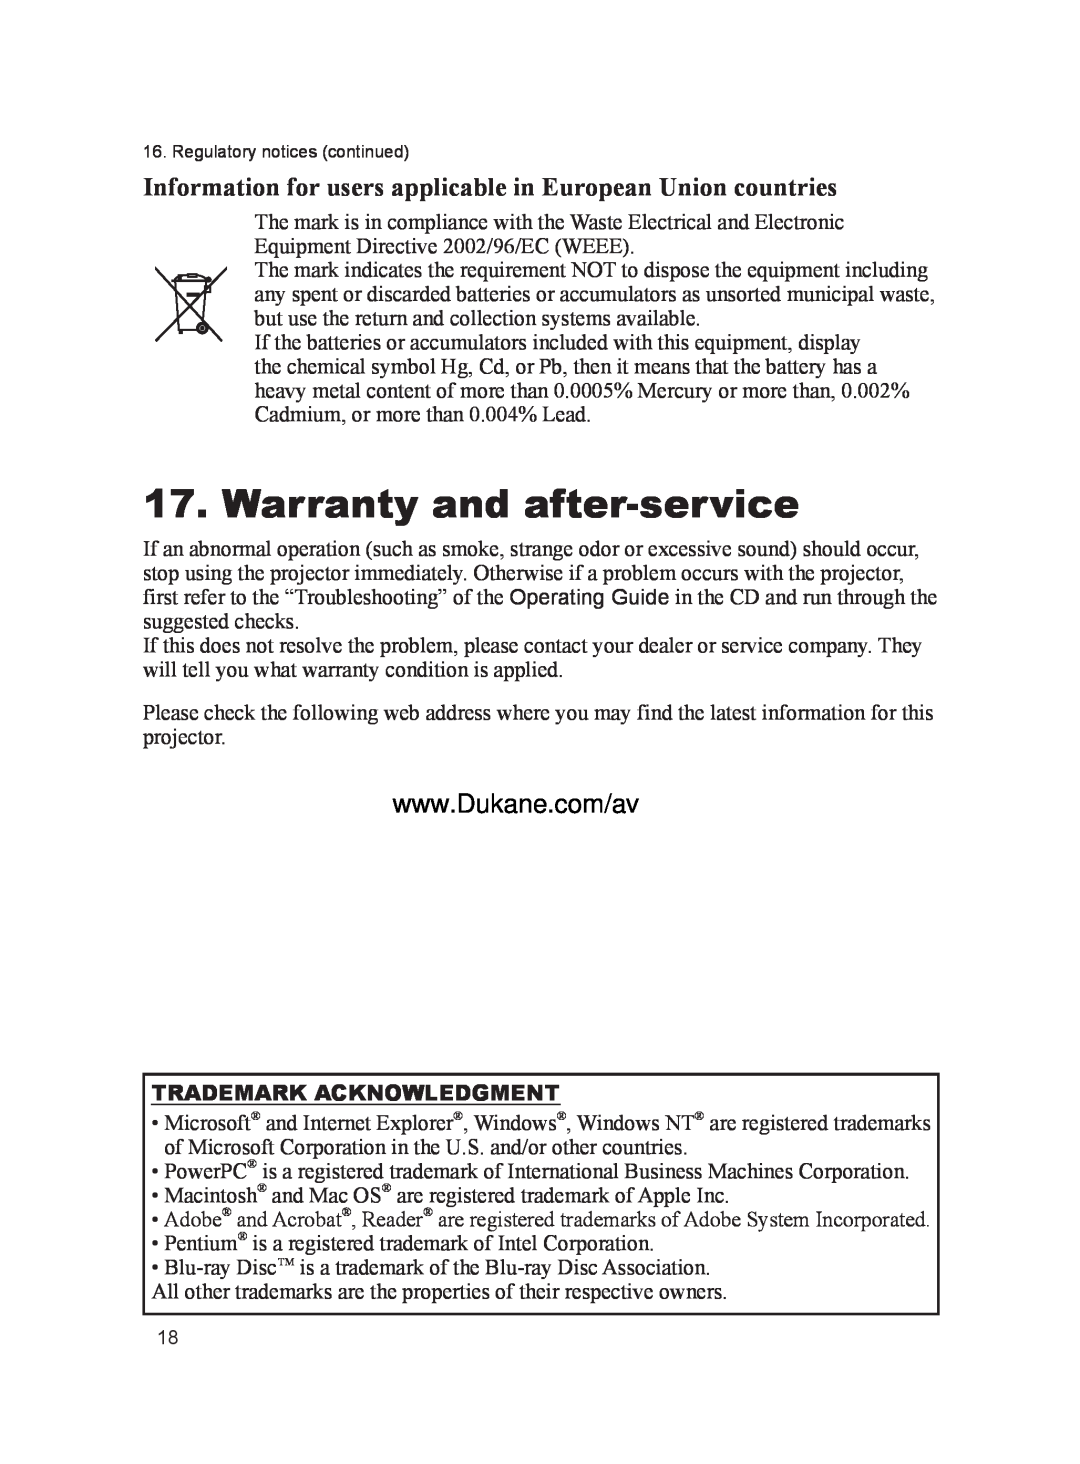 Dukane 8103H user manual Warranty and after-service, Information for users applicable in European Union countries 